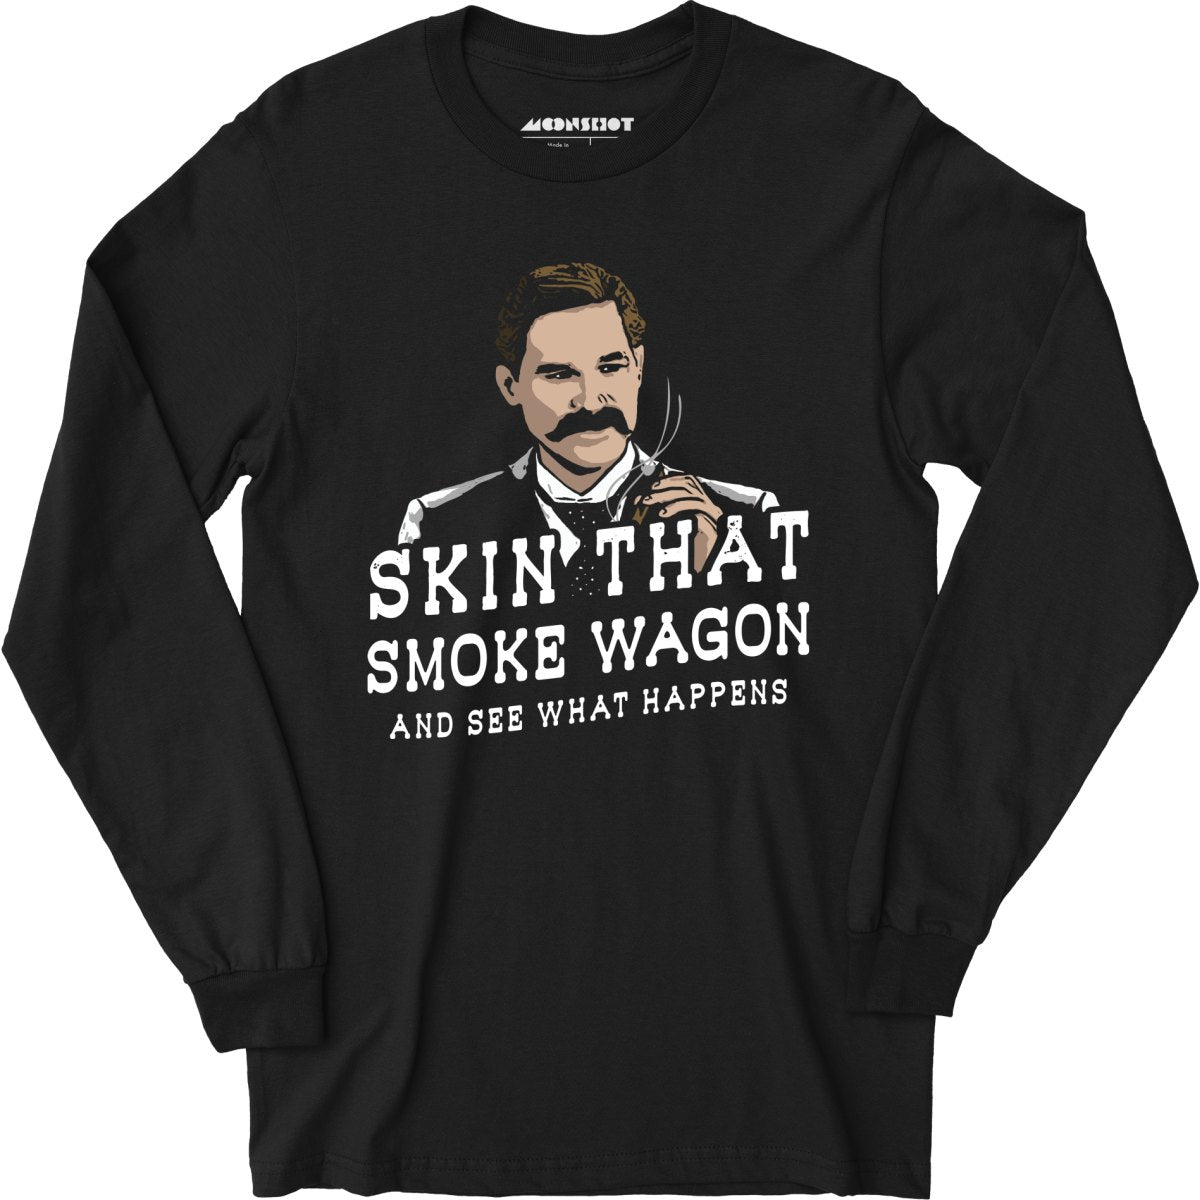 Skin That Smoke Wagon and See What Happens - Long Sleeve T-Shirt